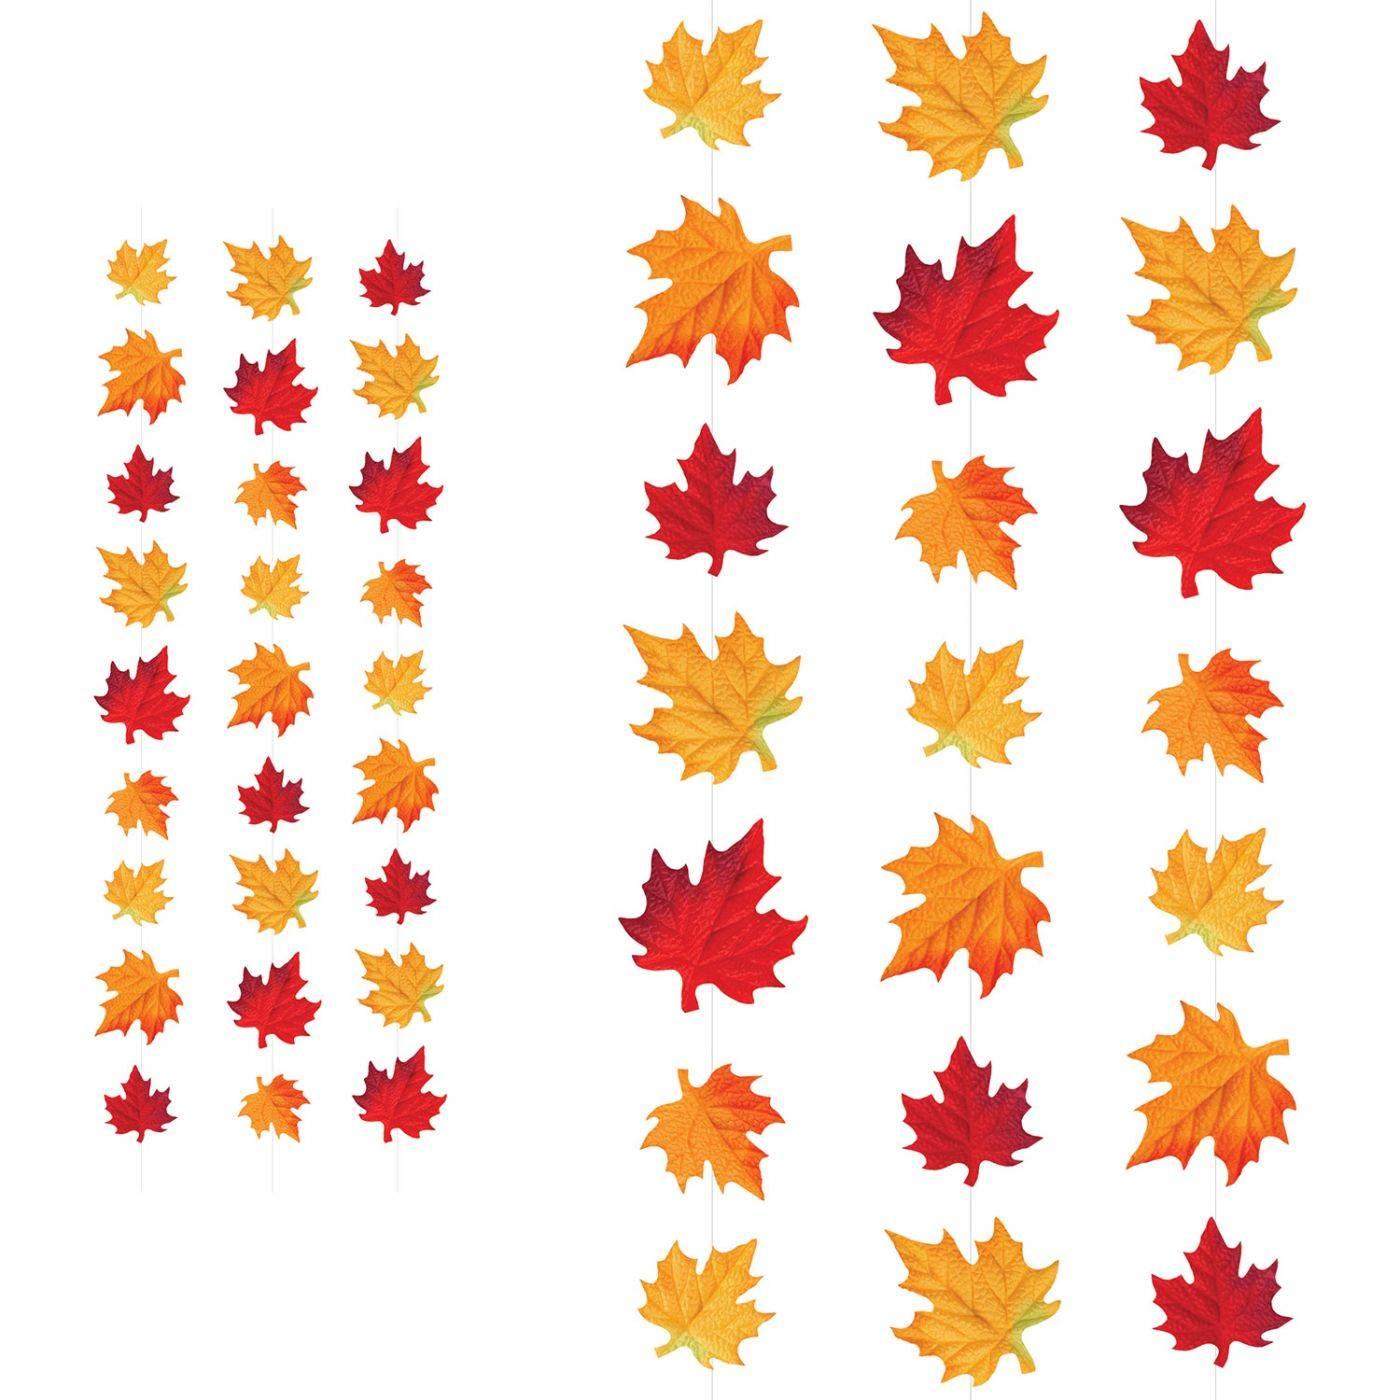 Deluxe Autumn Leaves Stringer decorations pack 3pcs 10ft long by Beistle 90016 available here at Karnival Costumes online party shop